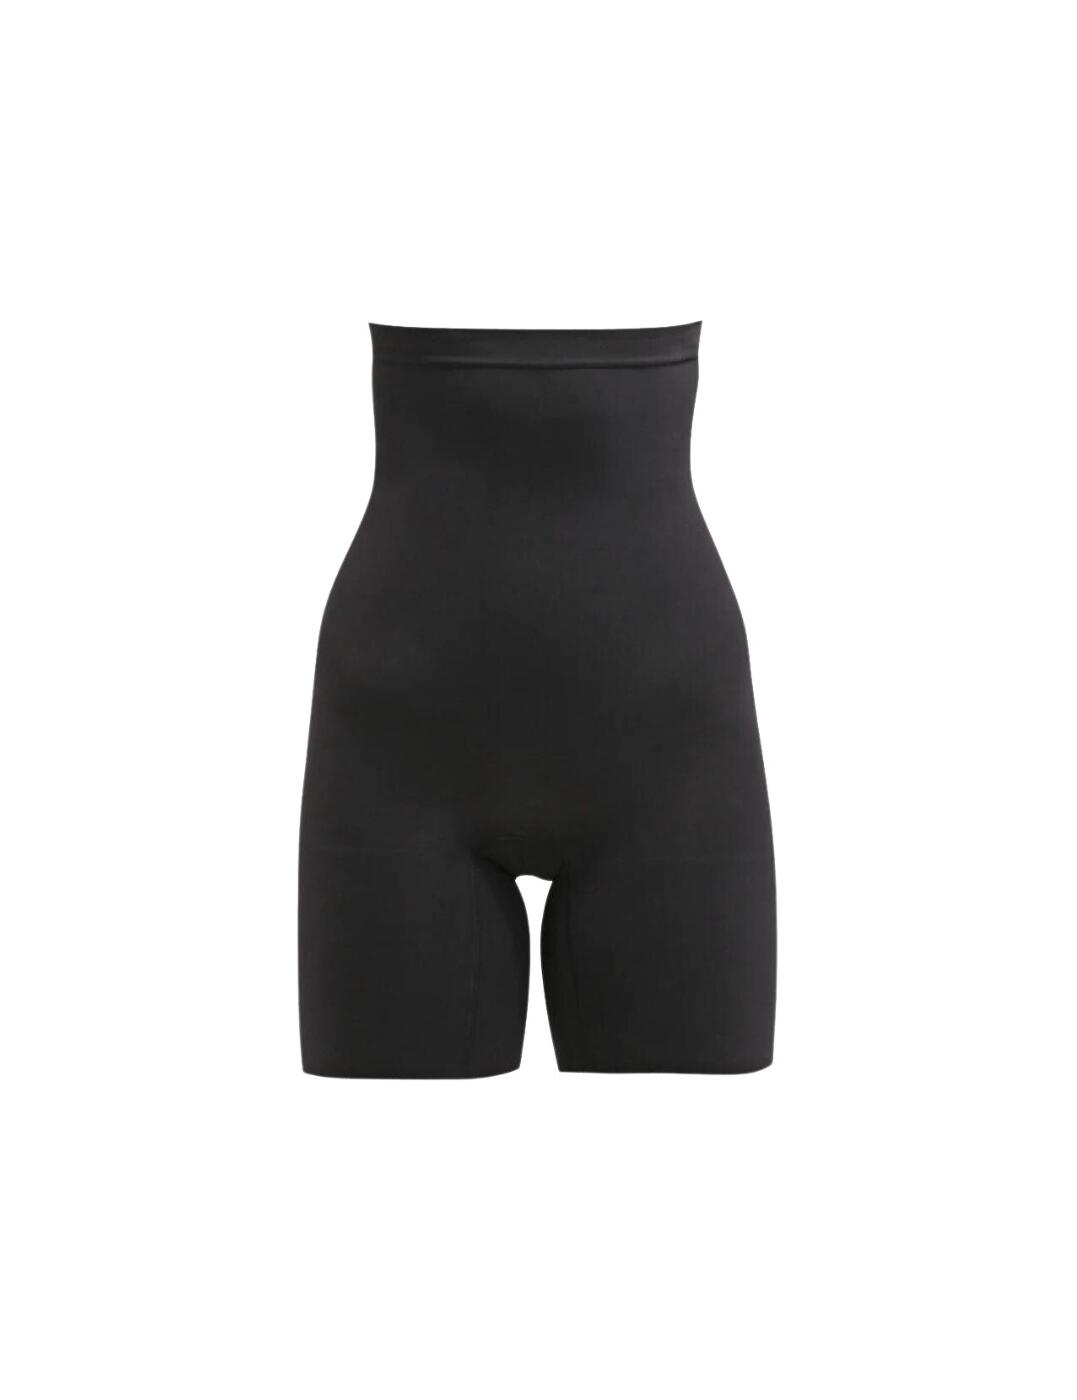 Spanx Trust Your Thinstincts High Waist Shaping Short